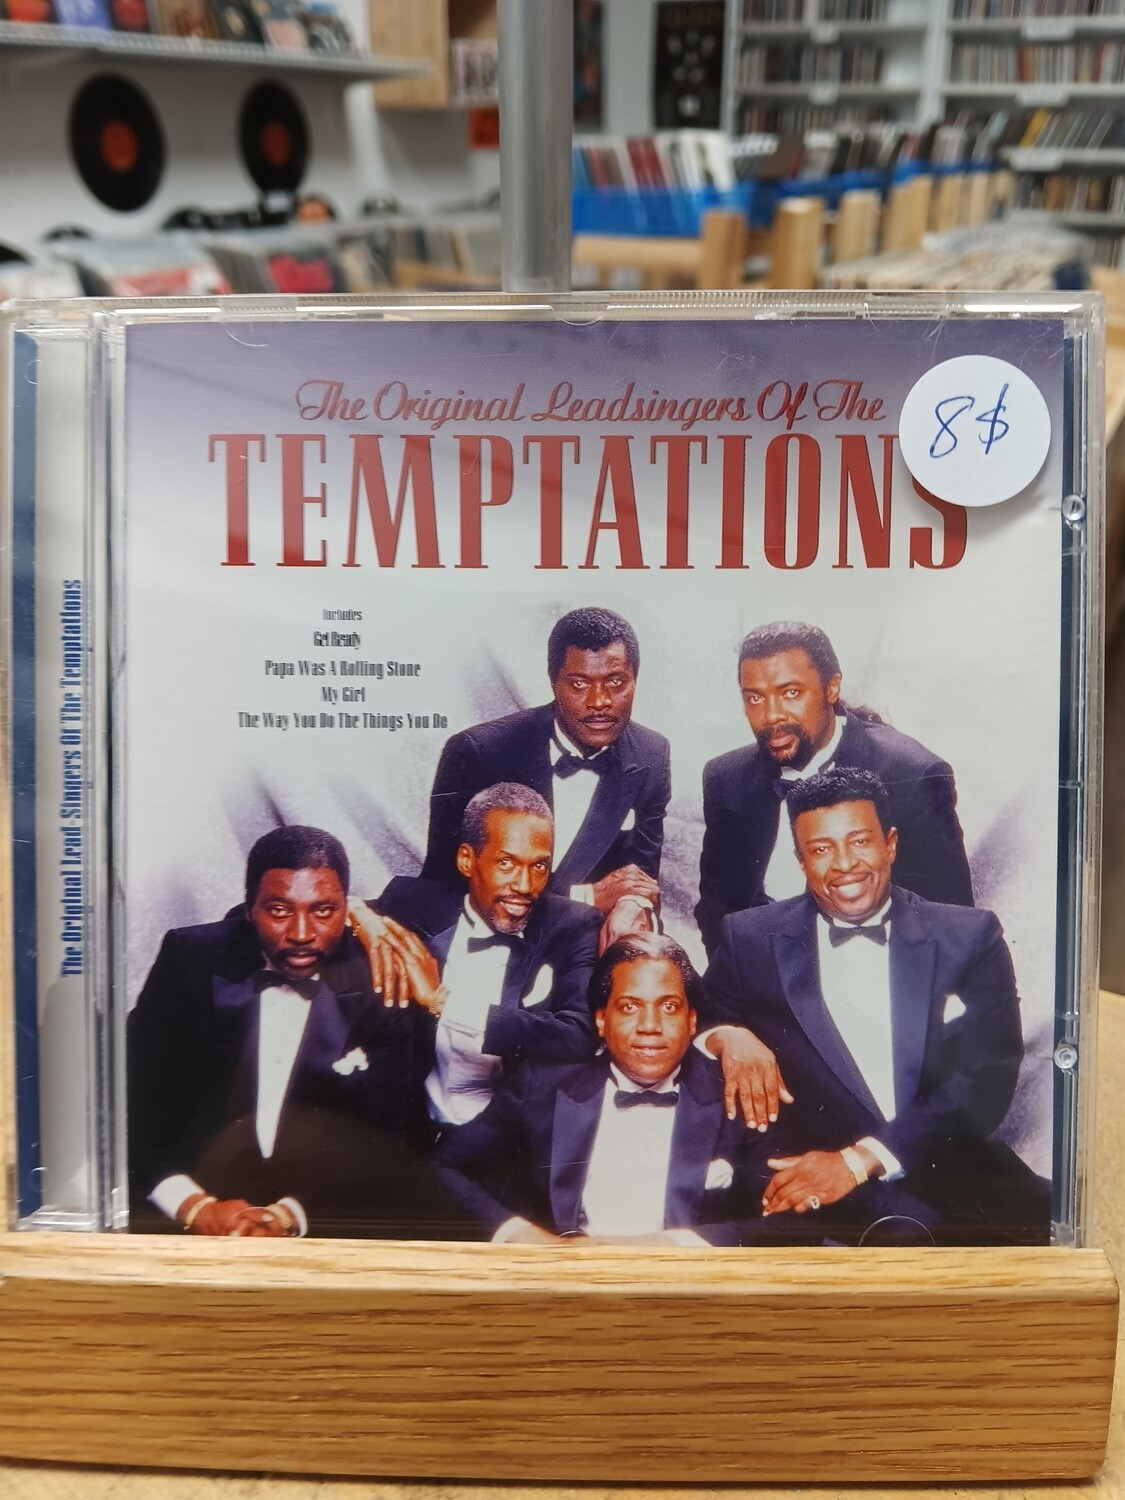 THE TEMPTATIONS - THE ORIGINAL LEAD SINGERS OF THE TEMPTATIONS (CD)